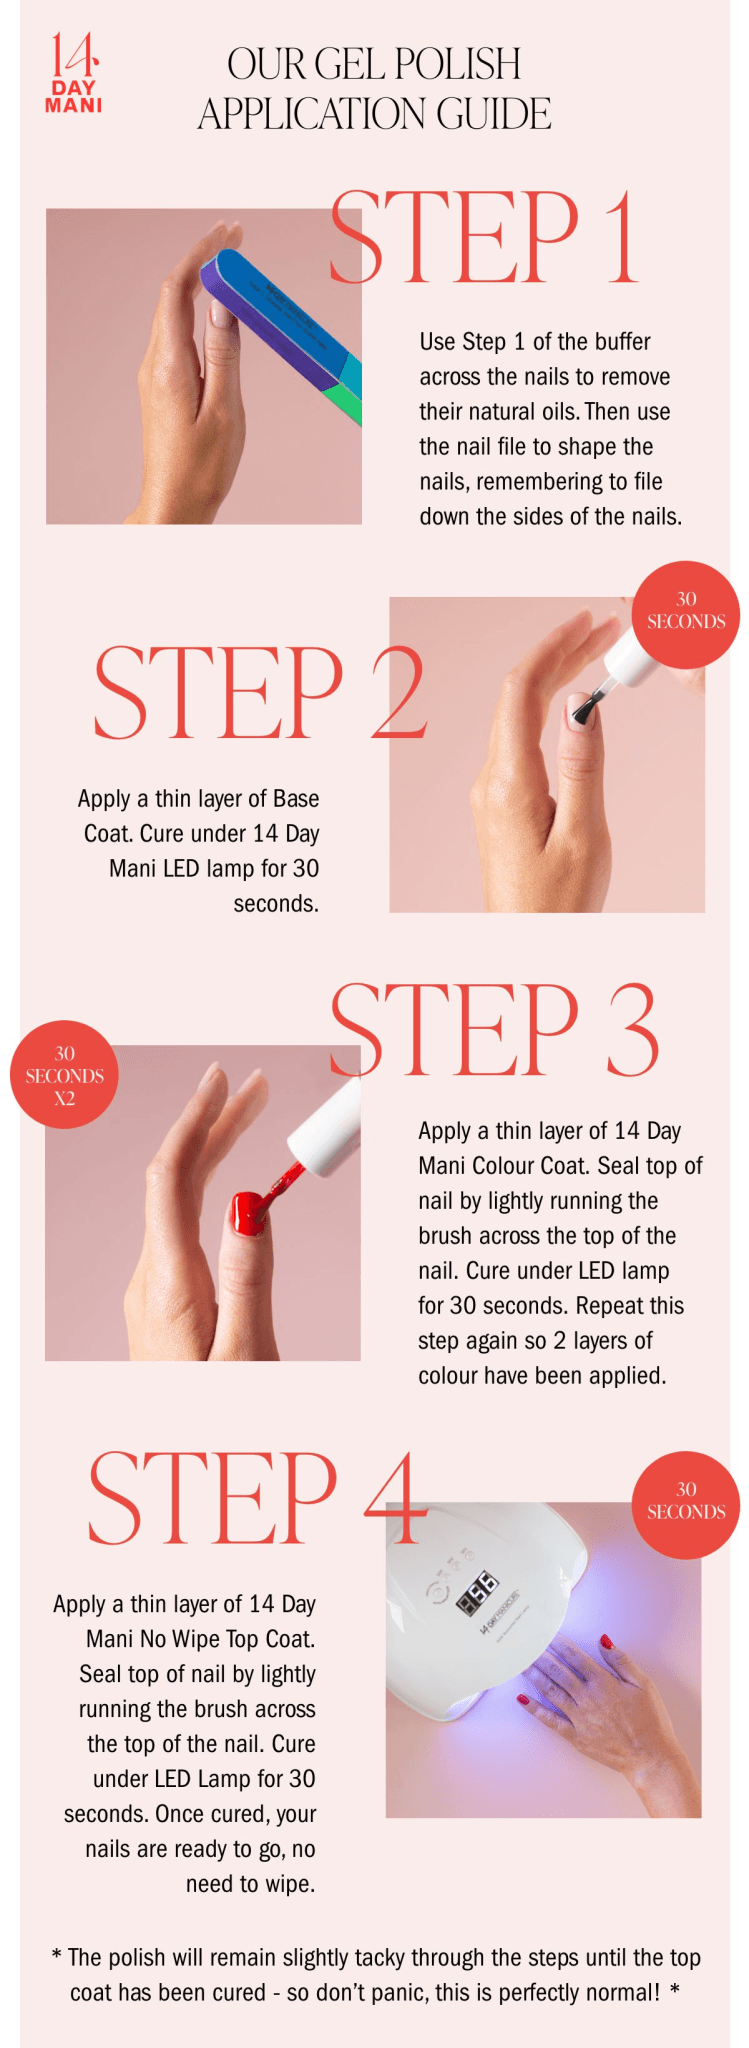 14 Day Manicure Gel Polish Application Guide Mobile